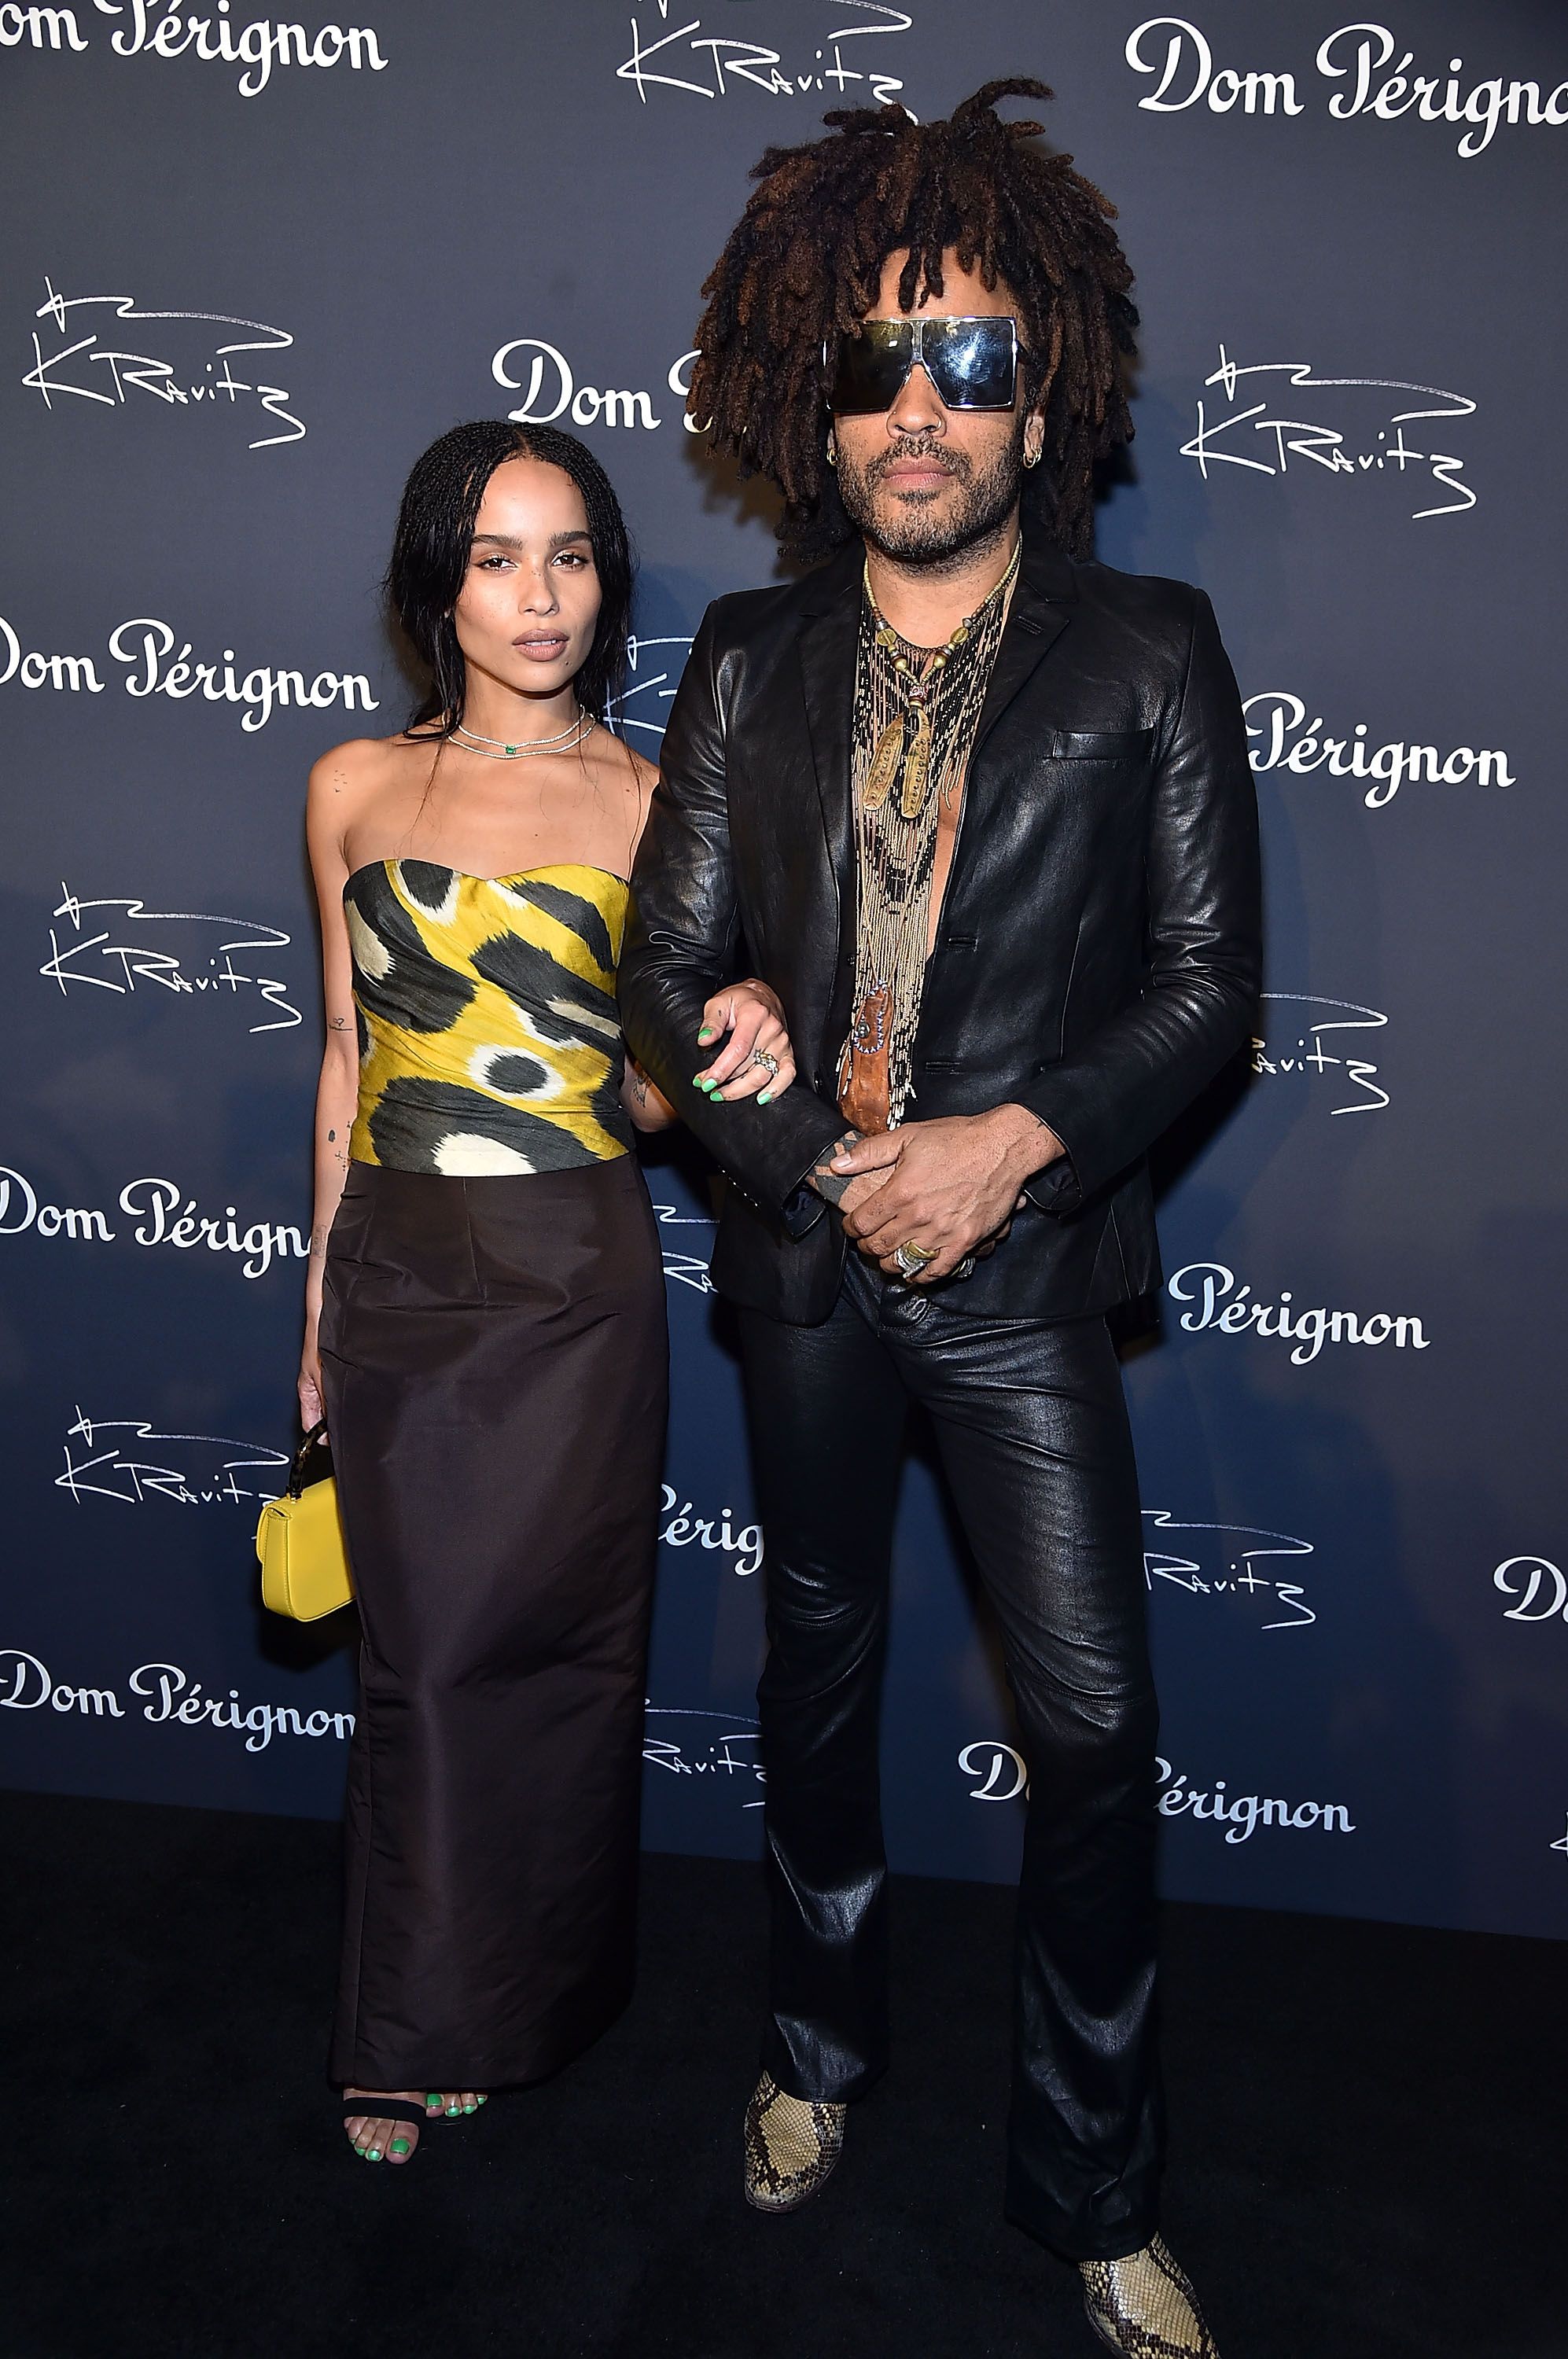 Zoë and Lenny Kravitz at the Dom Perignon & Lenny Kravitz: "Assemblage" Exhibition at Skylight Modern on September 28, 2018, in New York City | Photo: Theo Wargo/Getty Images